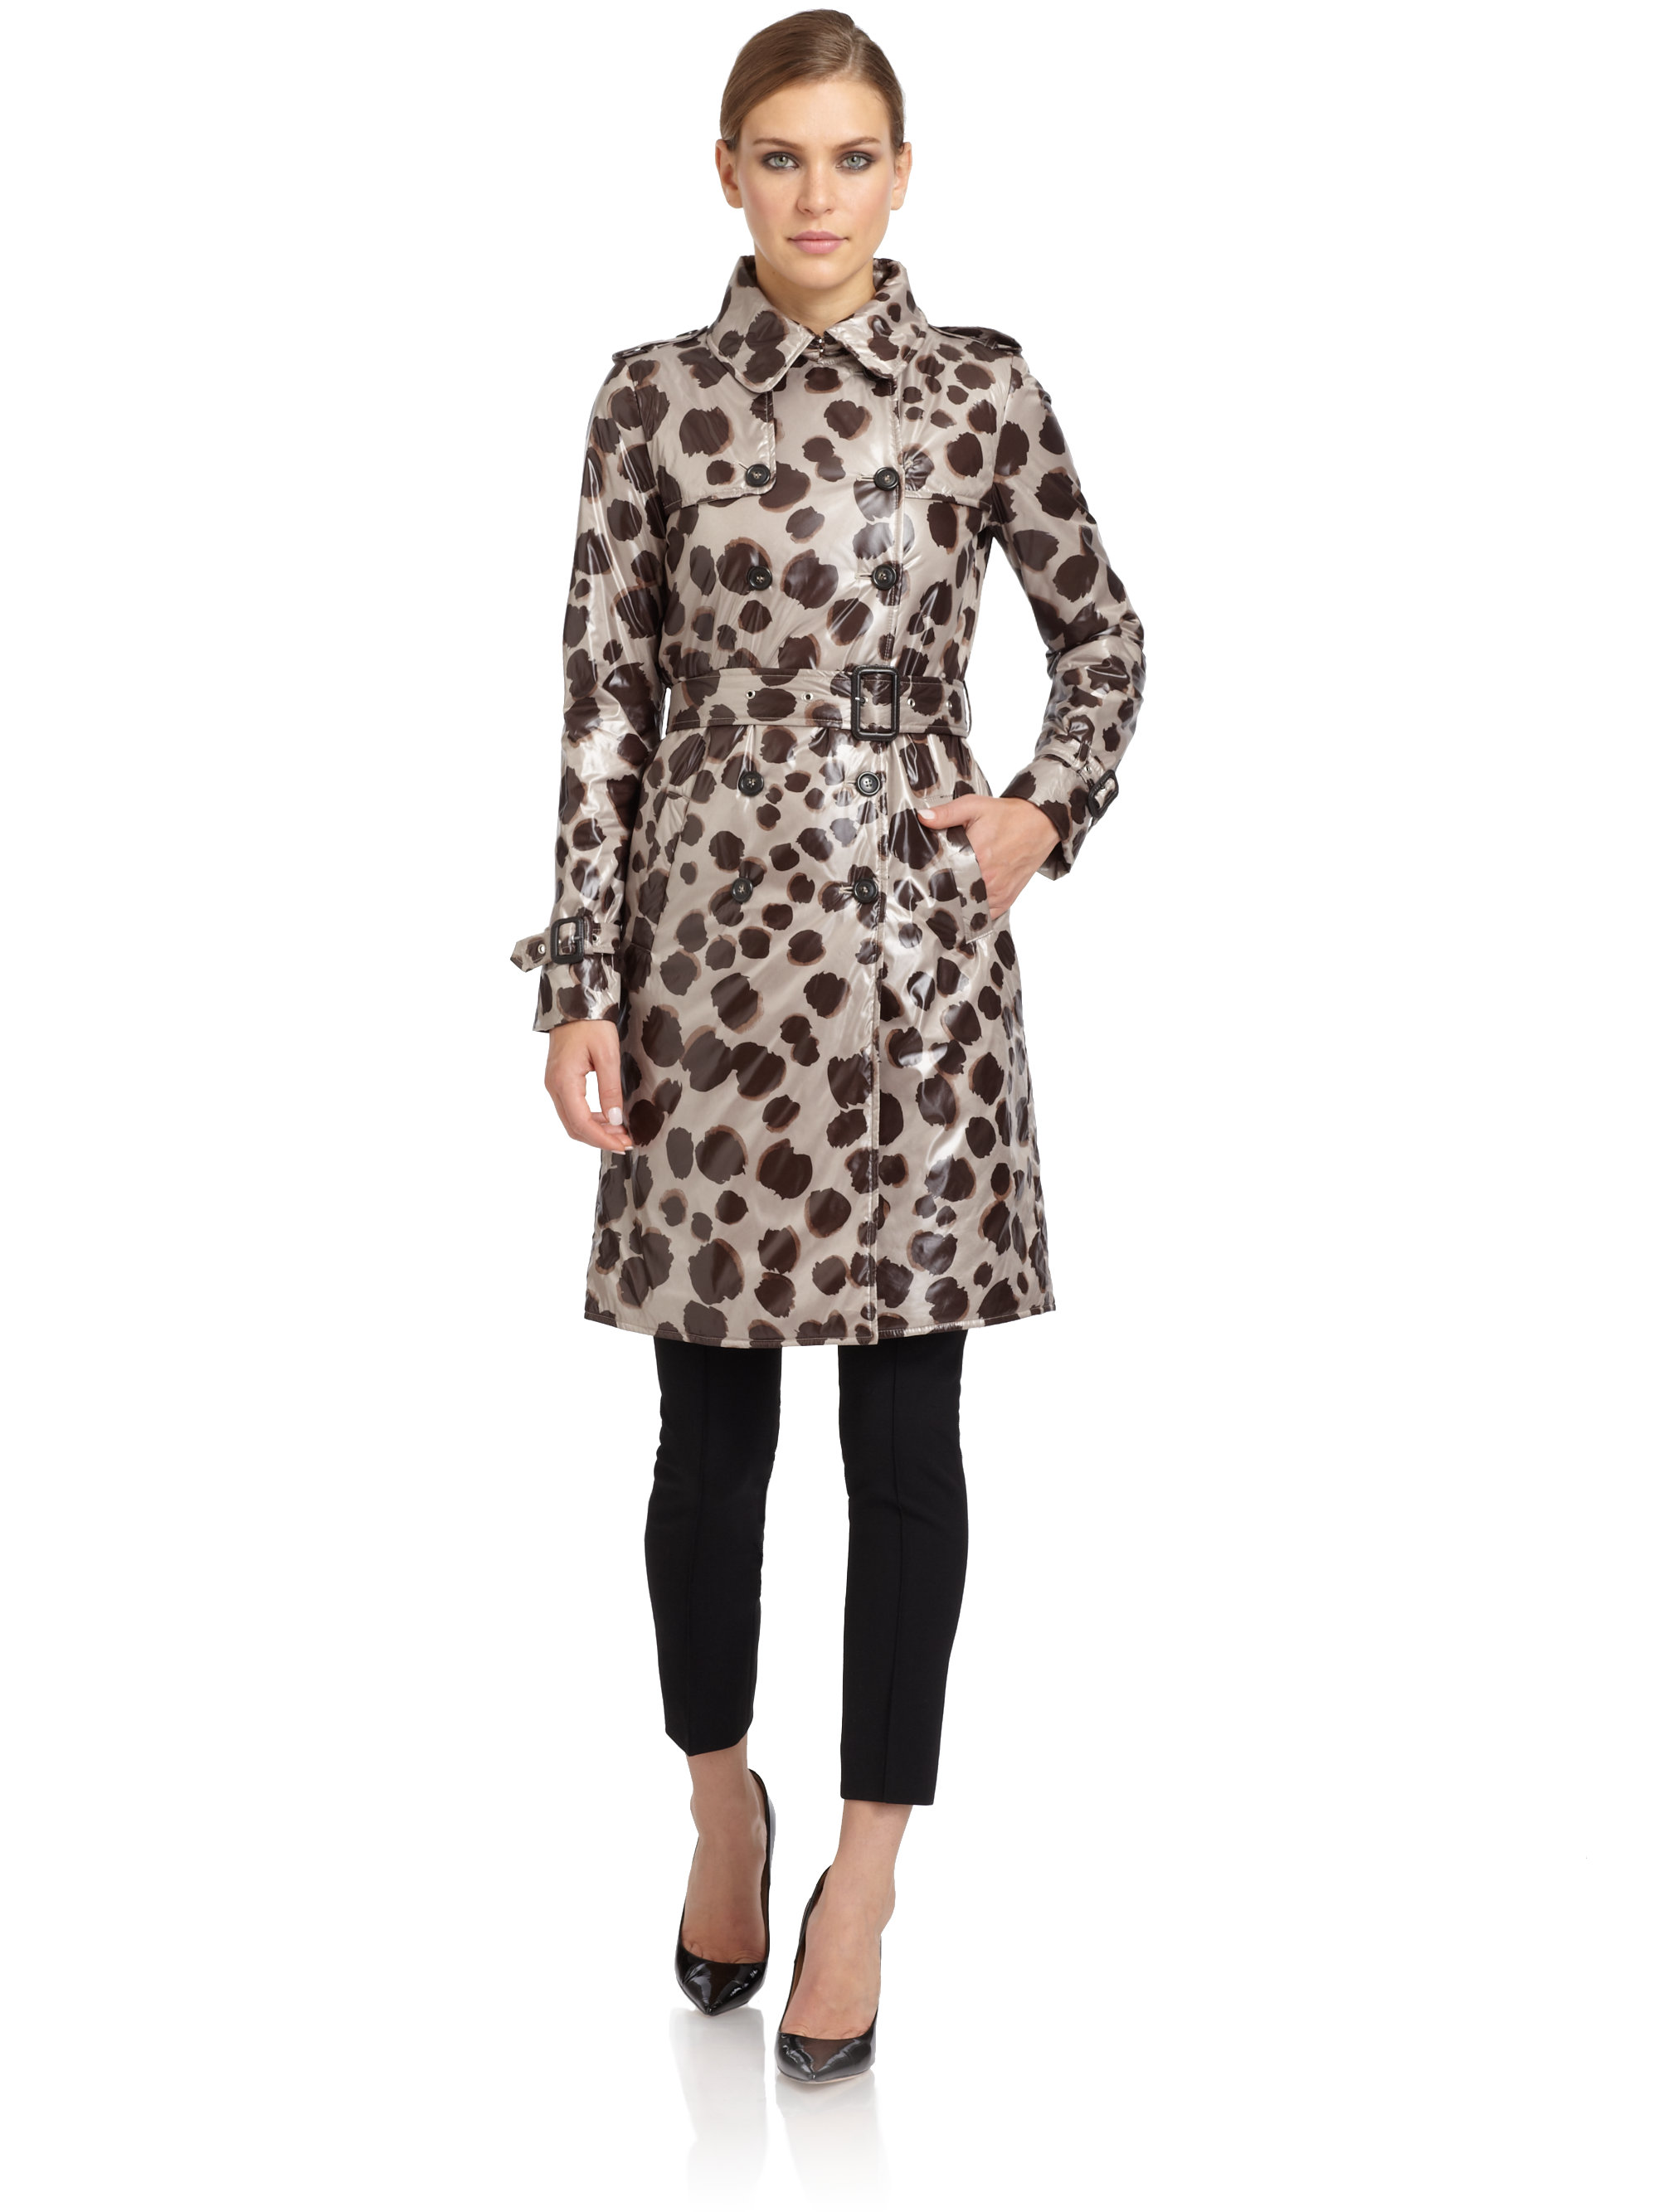 Moschino Cheap & Chic Leopard print Trench Coat in Beige (black) | Lyst